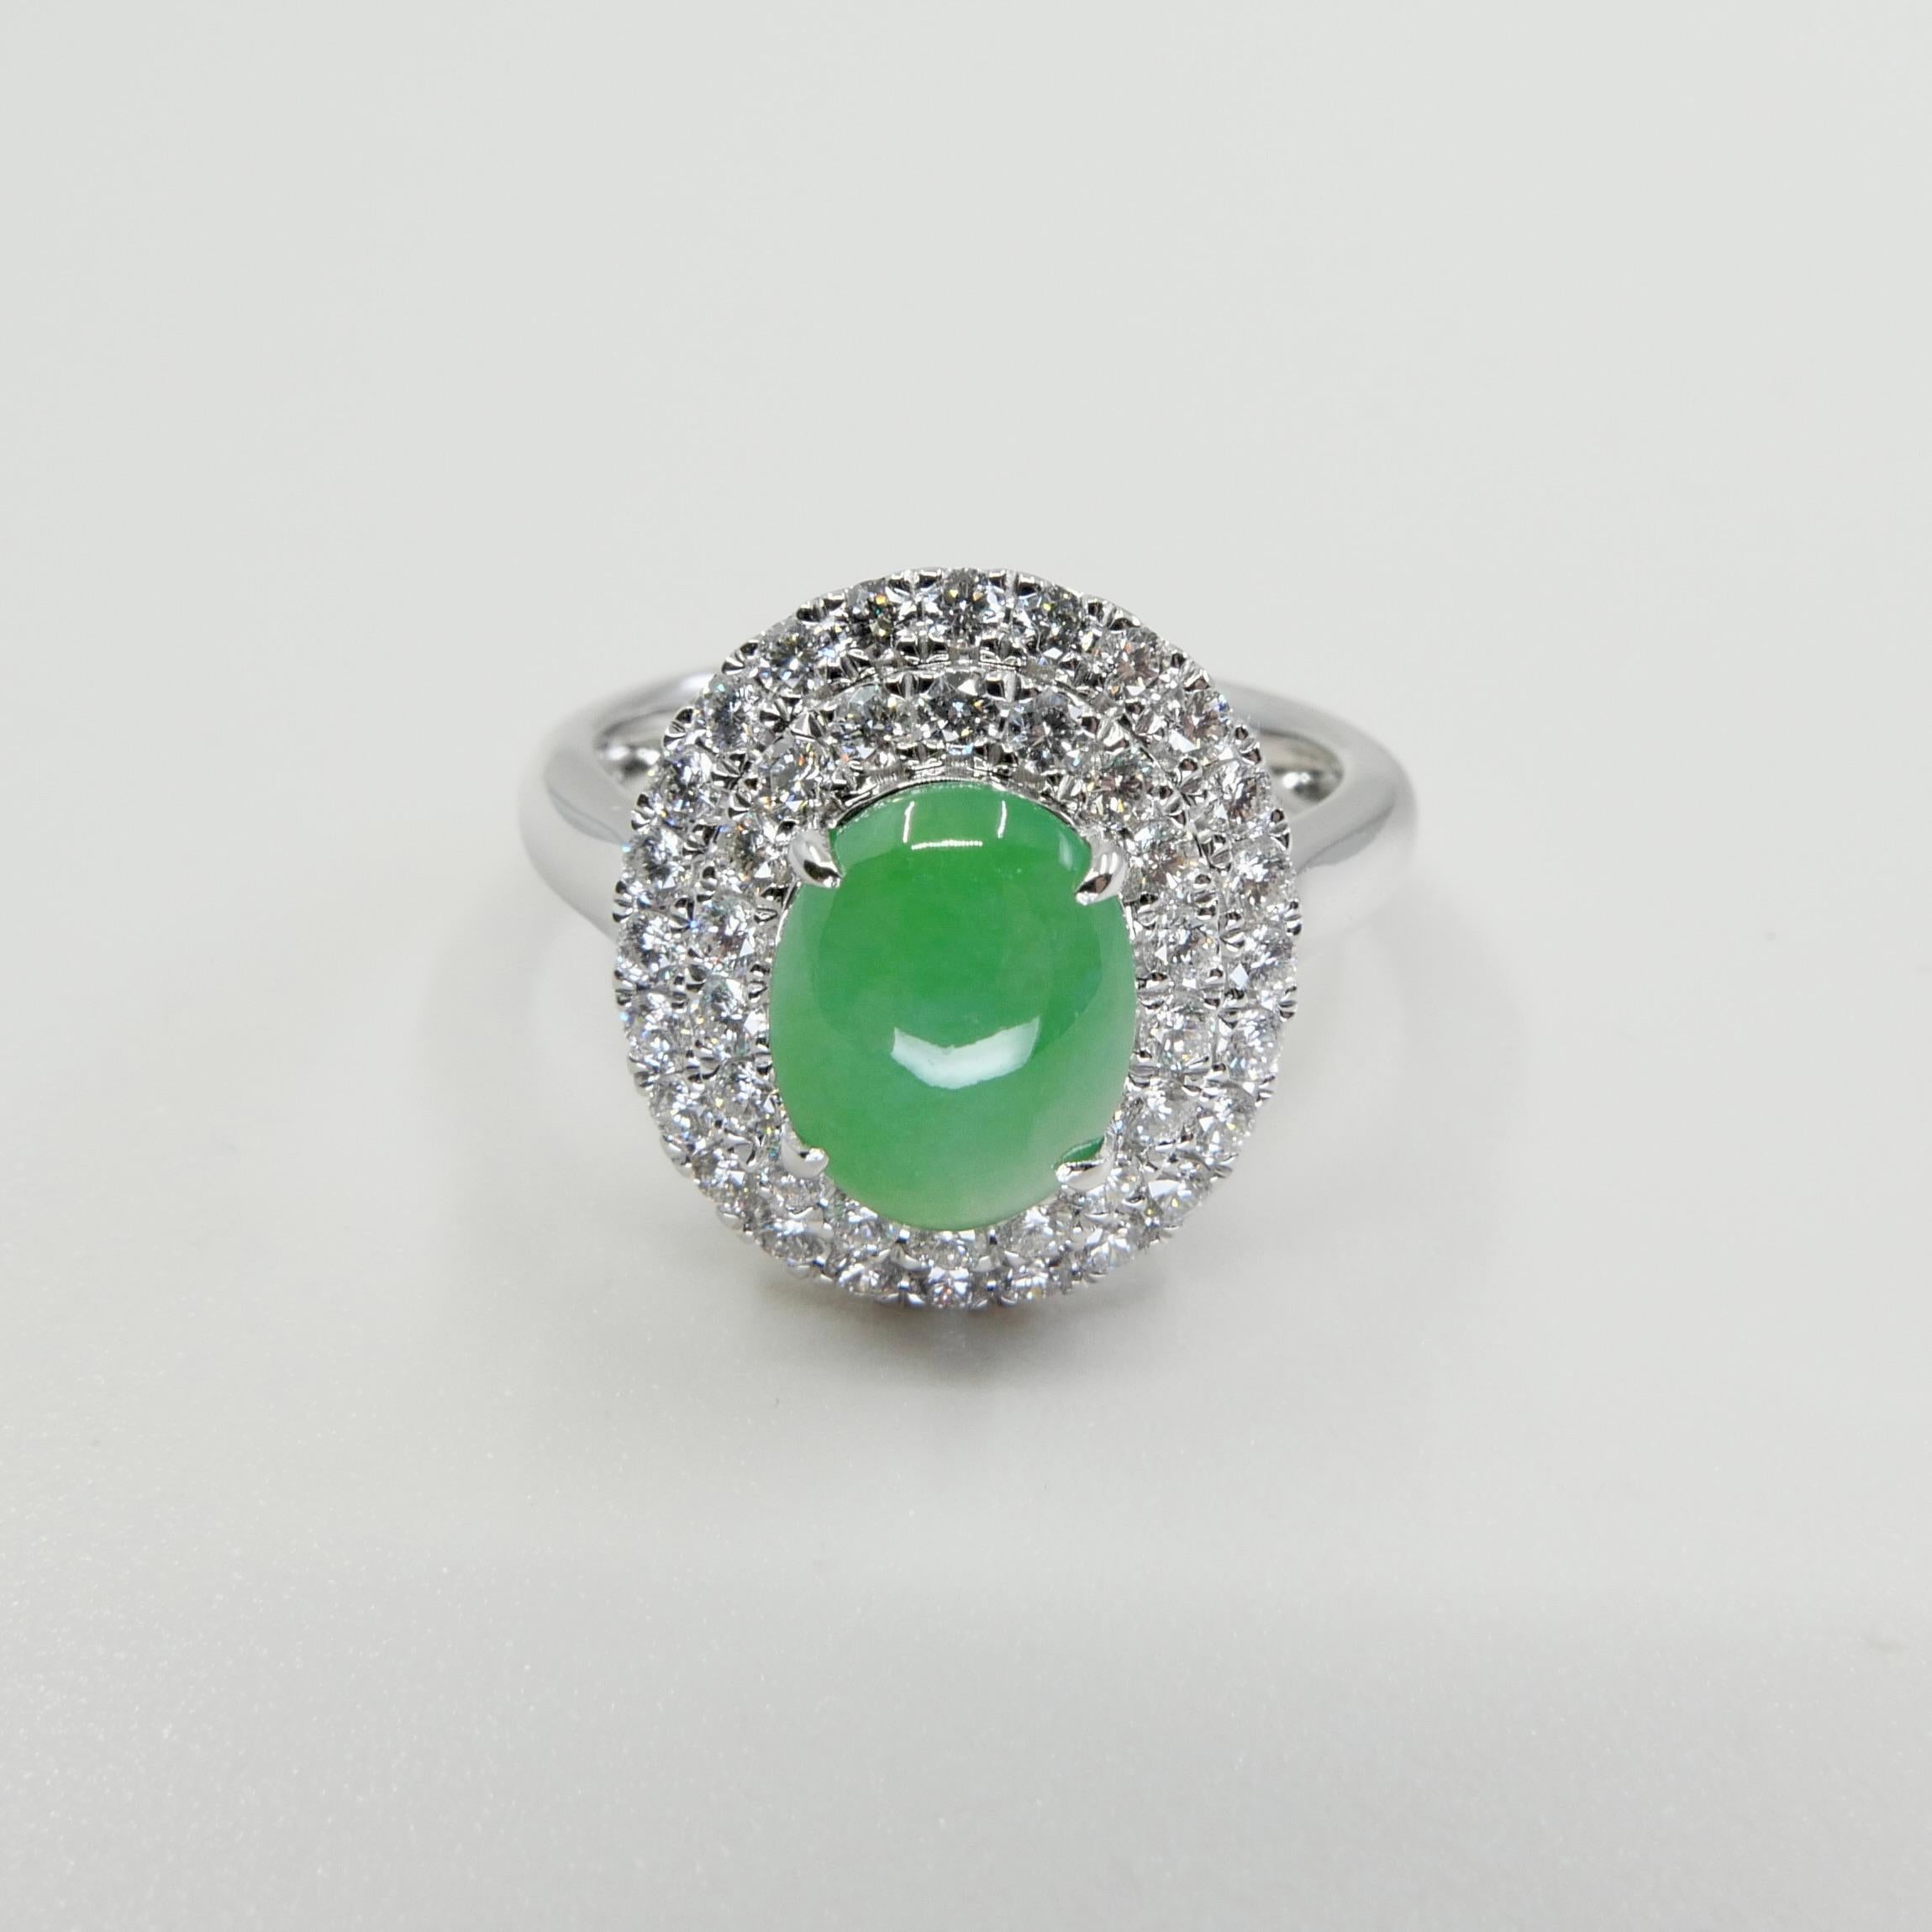 Certified 1.59 Carat Natural Jade & Diamond Cocktail Ring, Apple Green Color For Sale 7